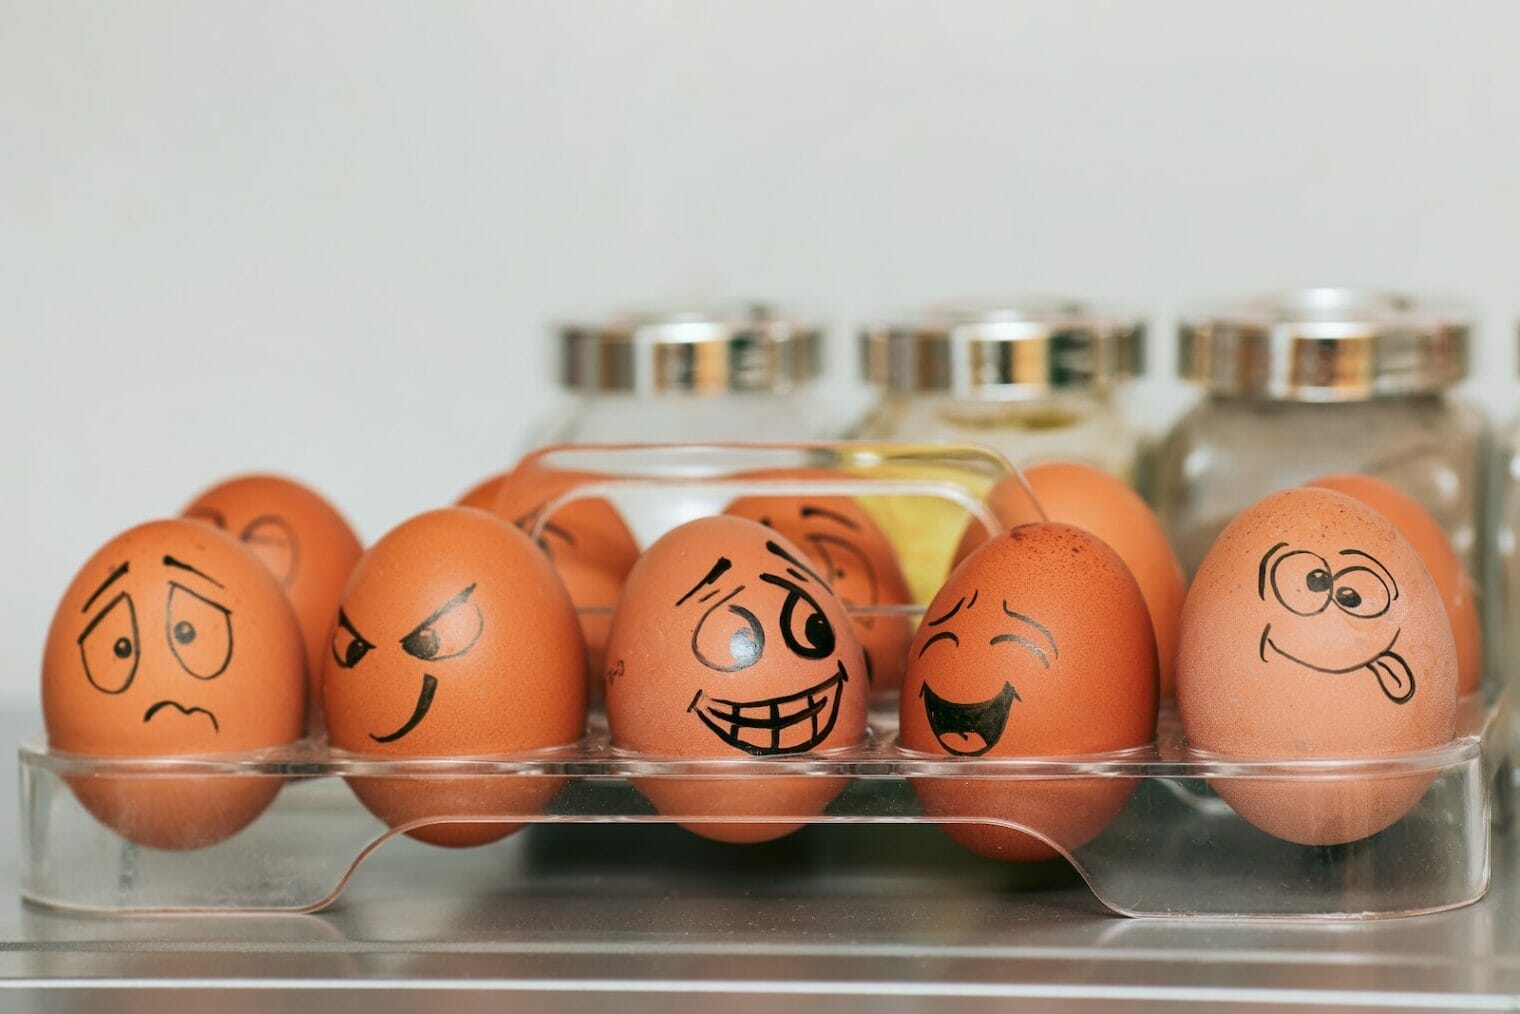 A tray of eggs with faces drawn on them used in parenting behavior therapy for healthcare equity.